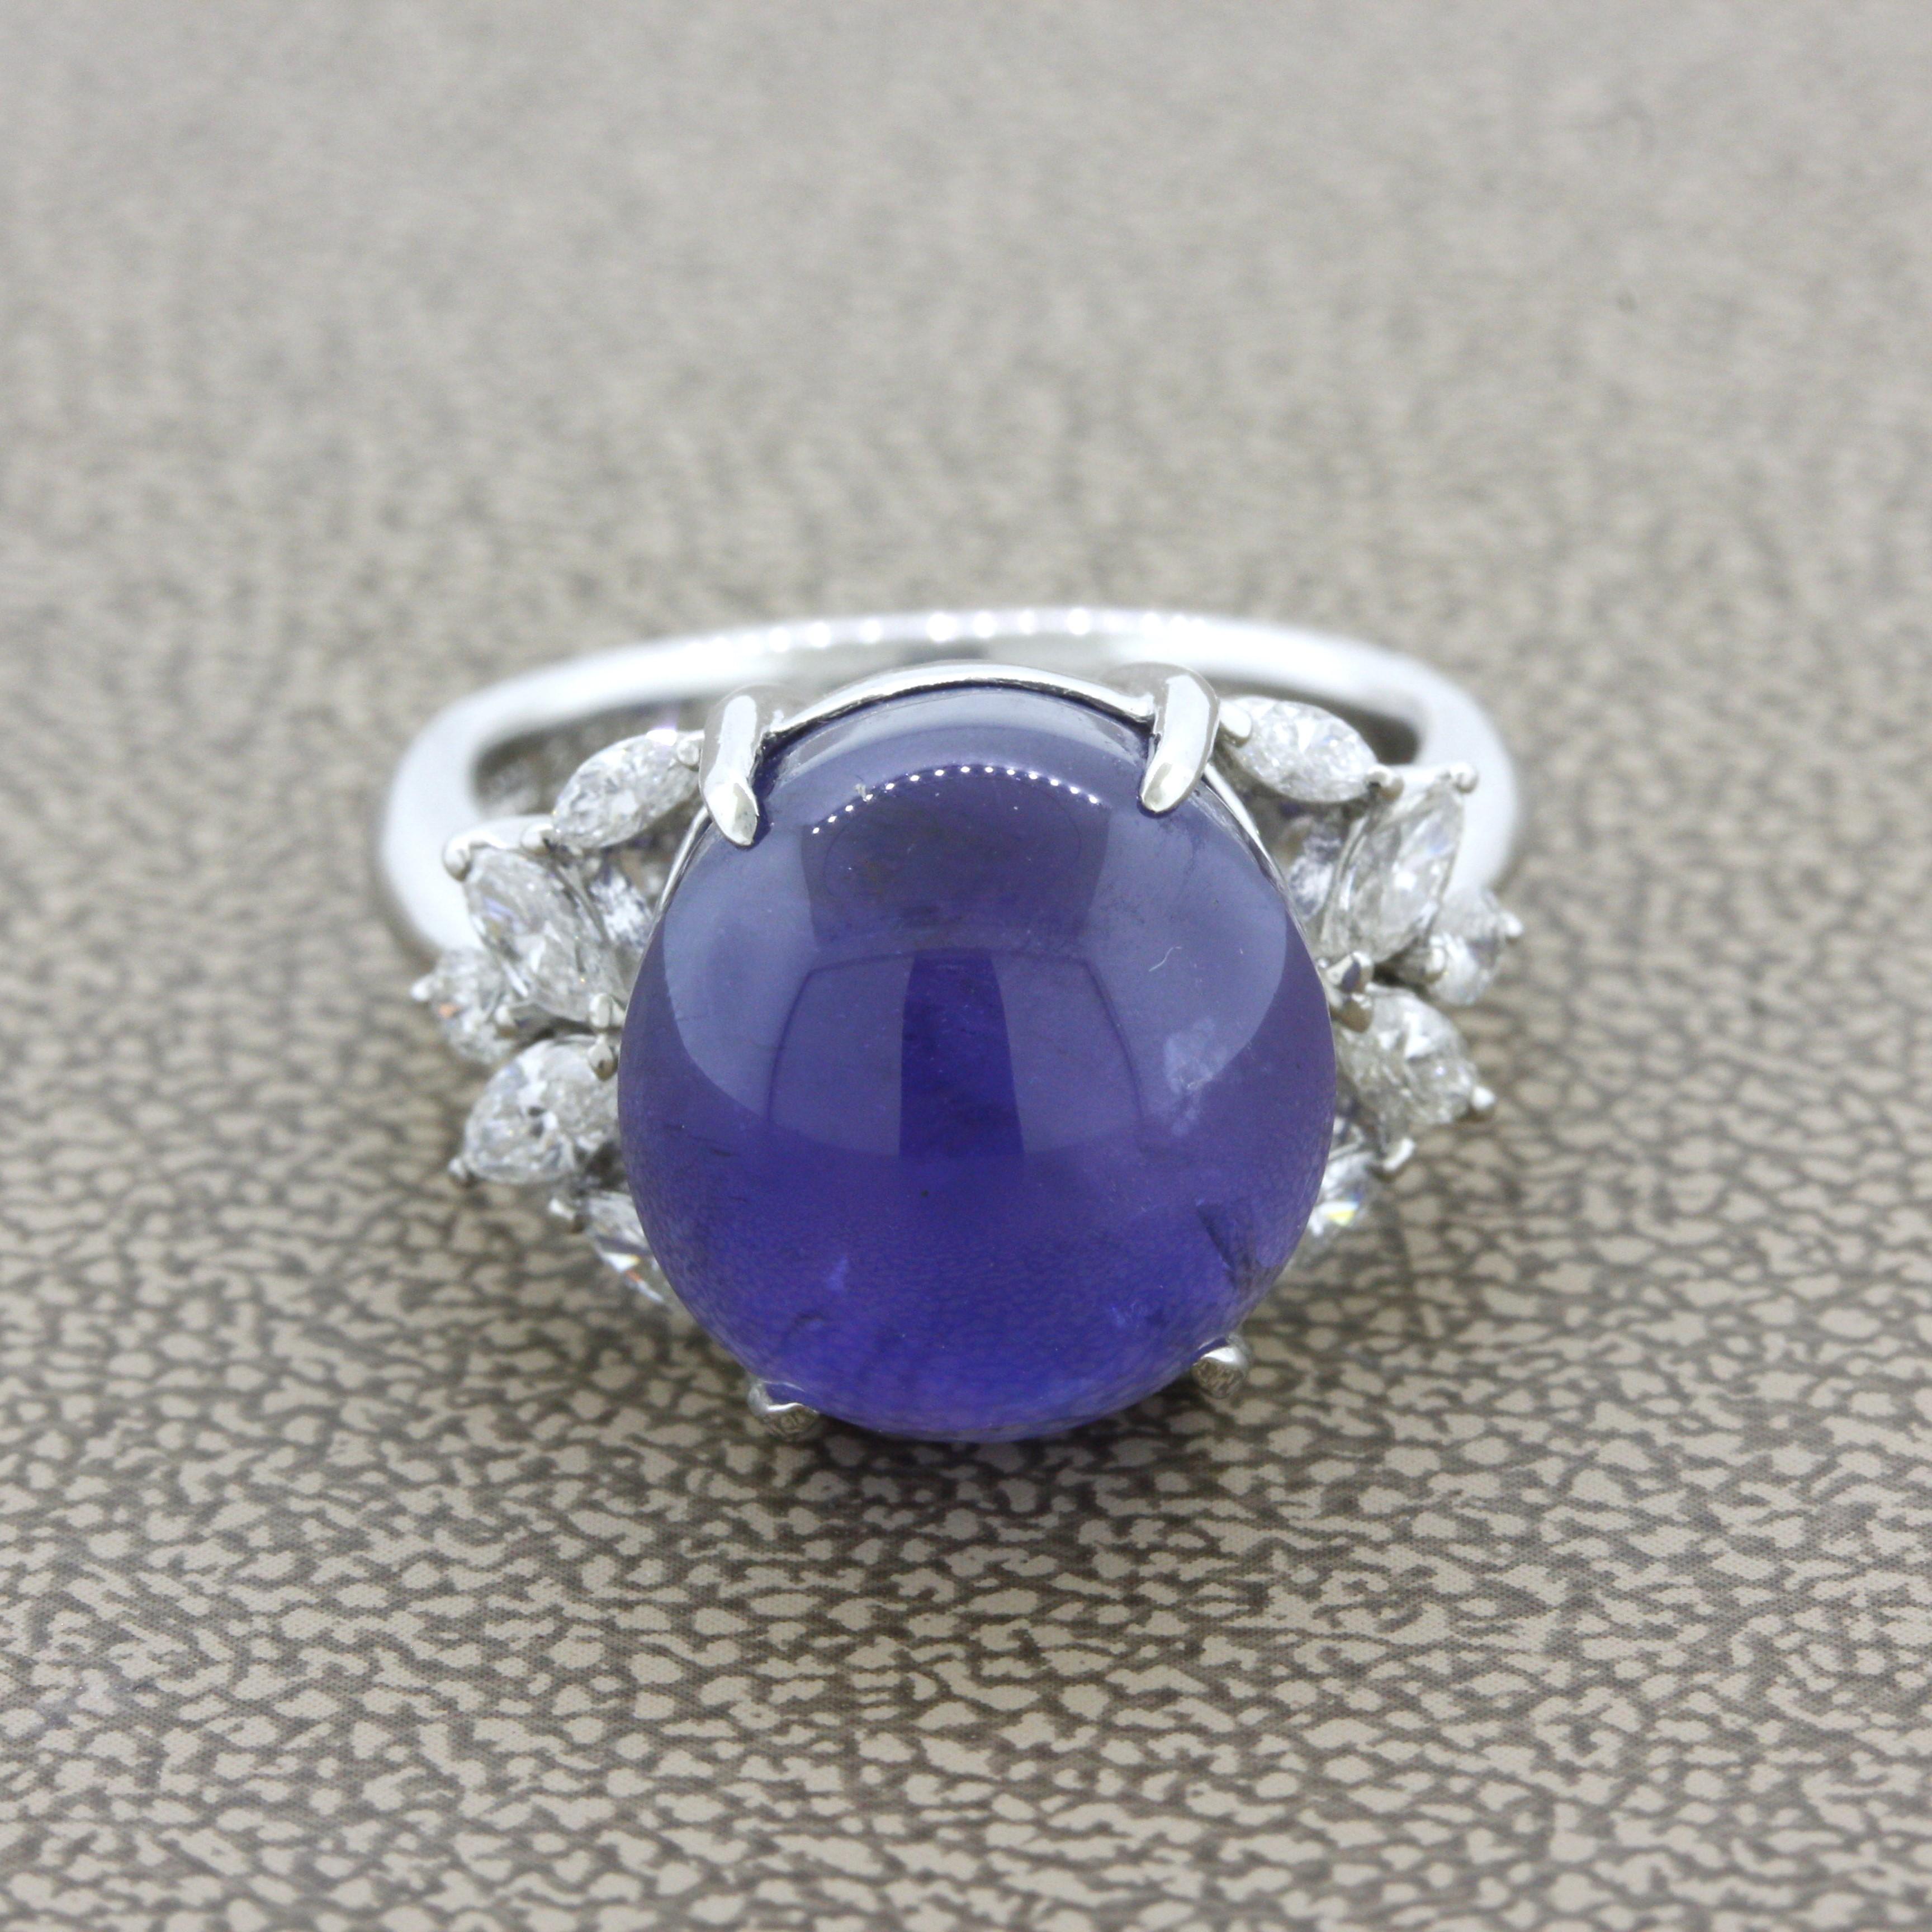 A unique and special gem! It is a large 20.38 carat star sapphire which also has color change, two unique phenomena!  The sapphire has a violitish-blue color that changes to a stronger purple color. Adding to that when a light hits the top of the